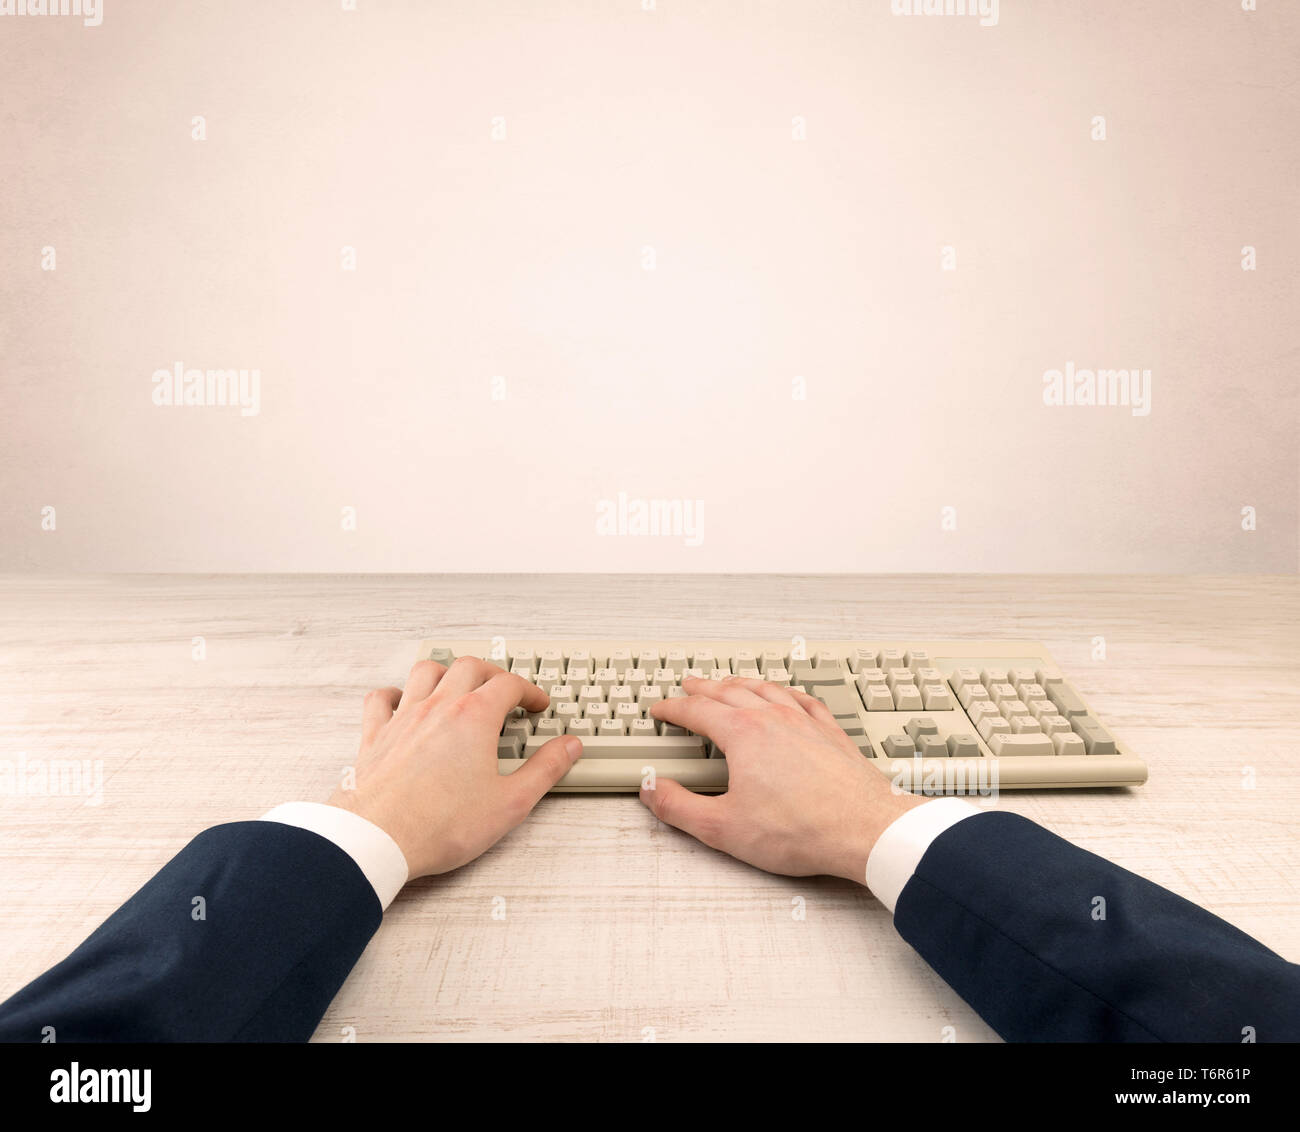 First person view of an elegant businessman hand  typing on light background  Stock Photo